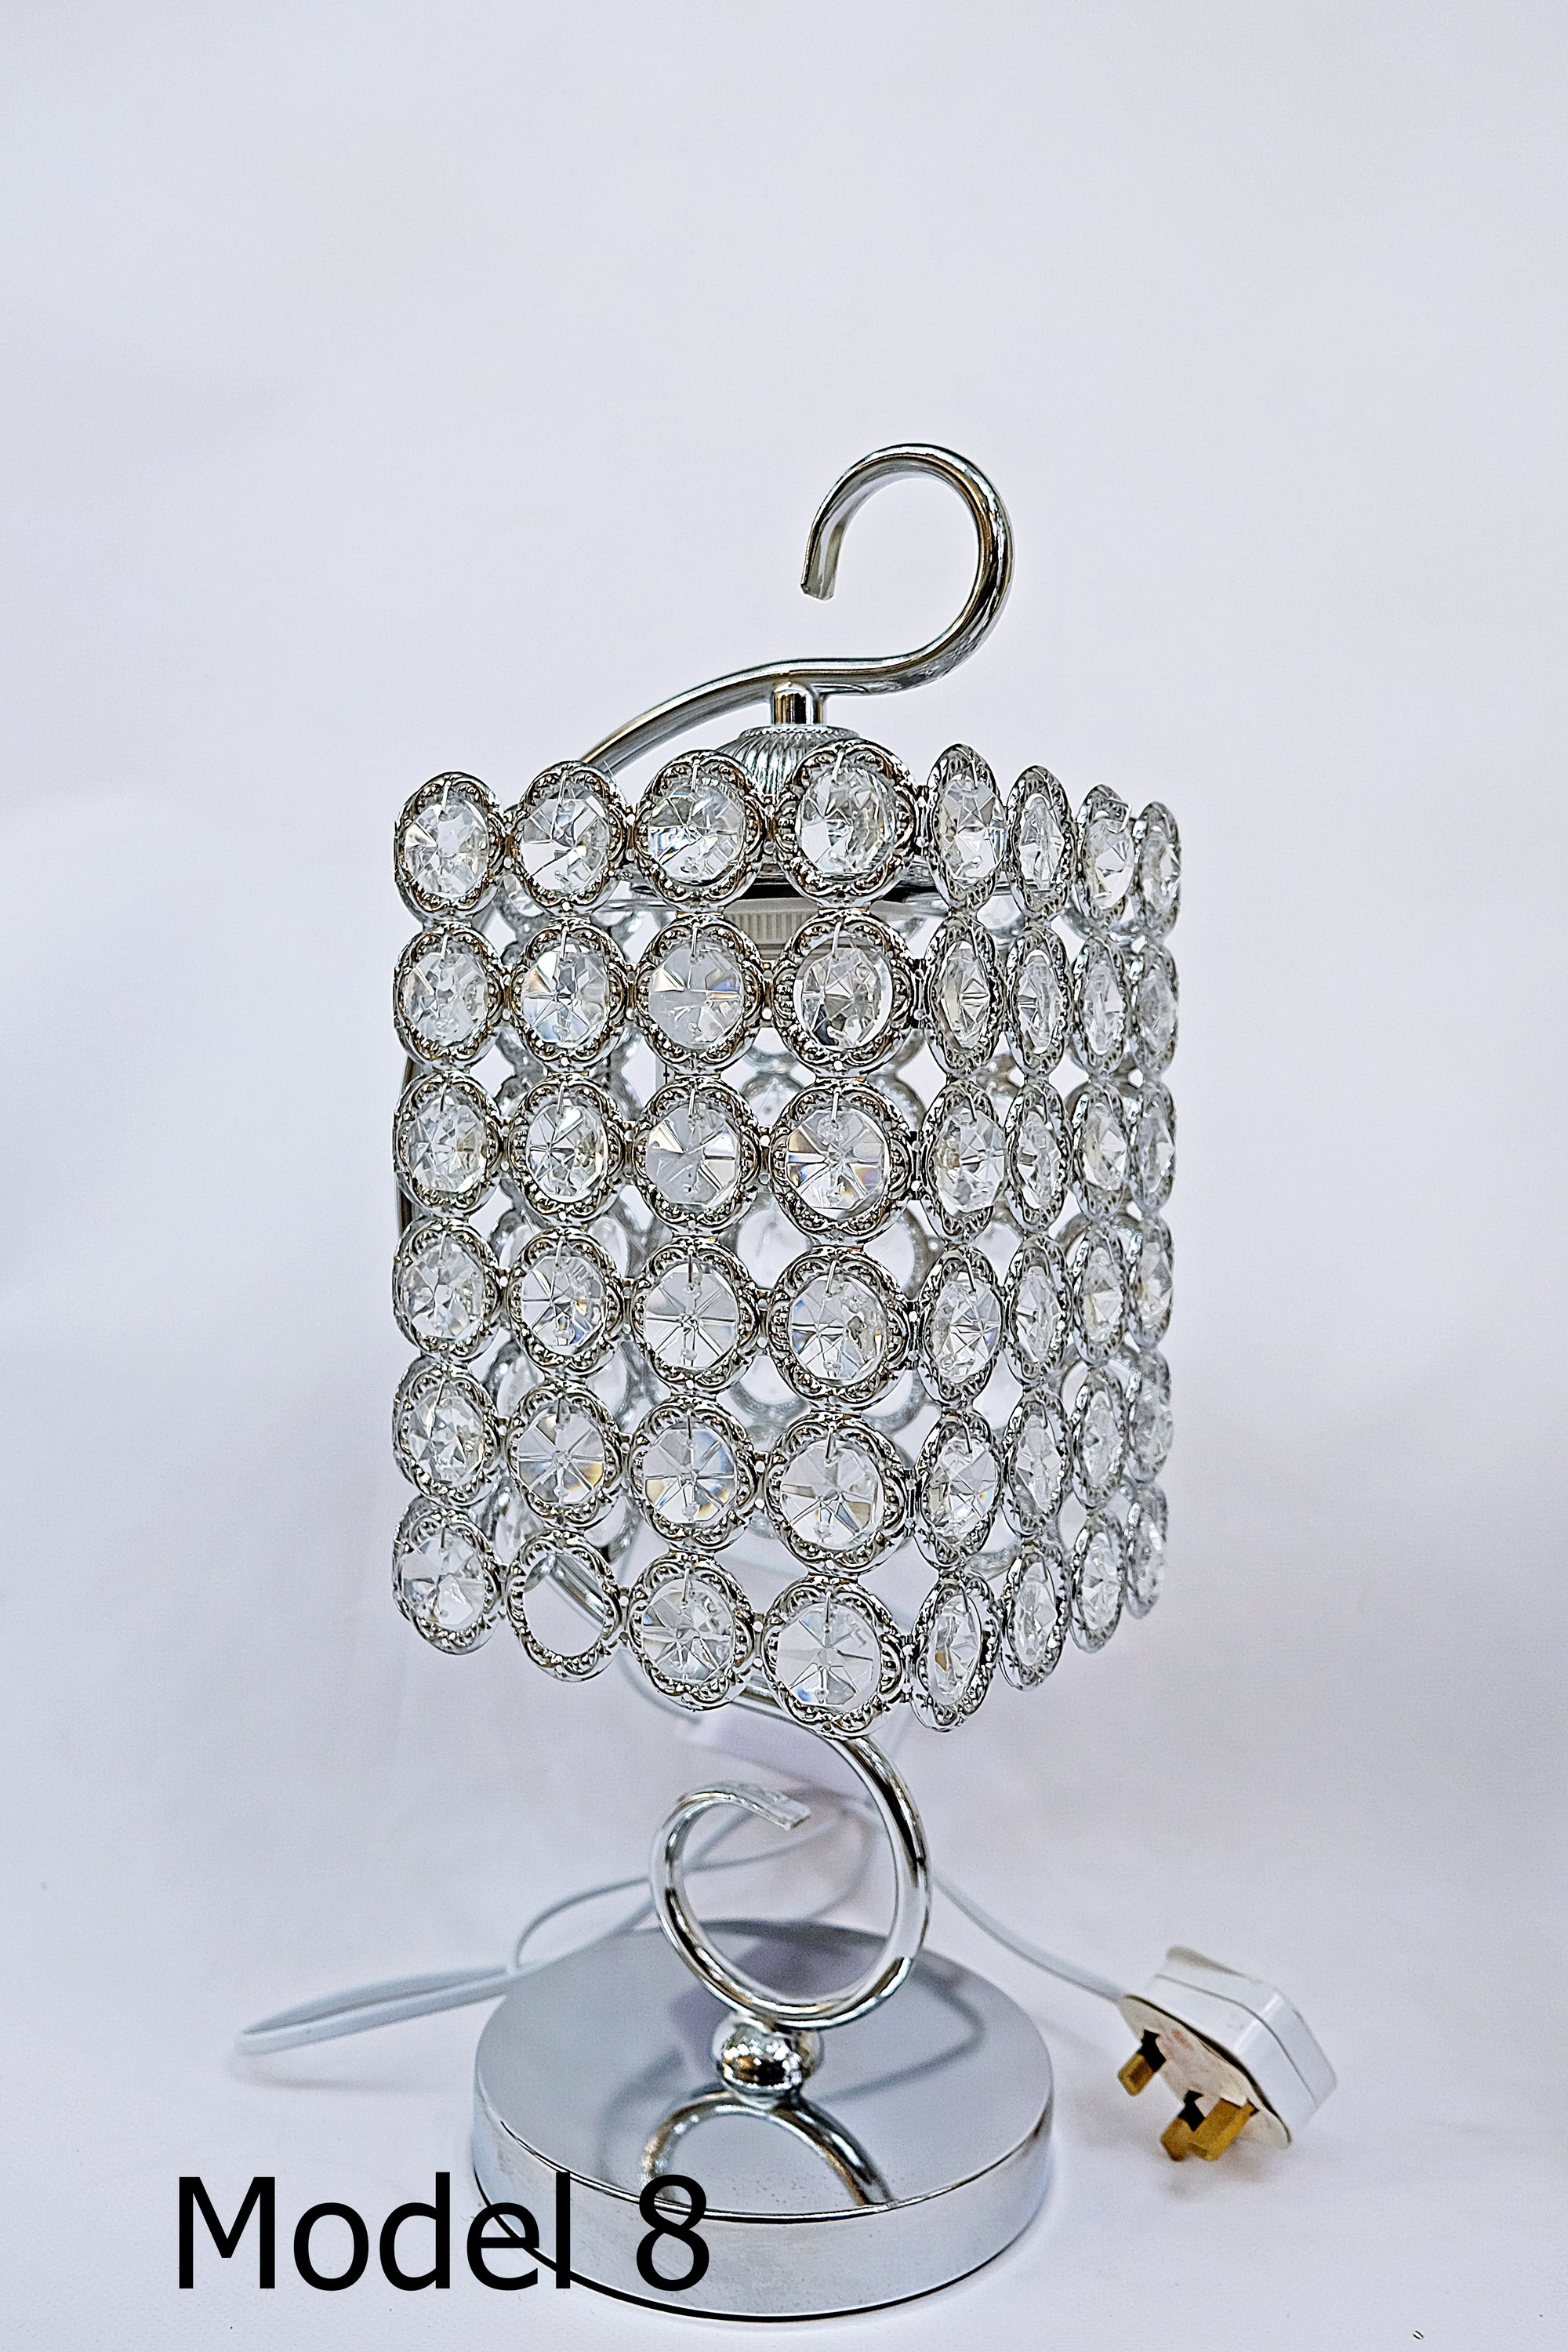 Thin metallic frame crystallic table lamp with incorporated LED [DSSCC01]